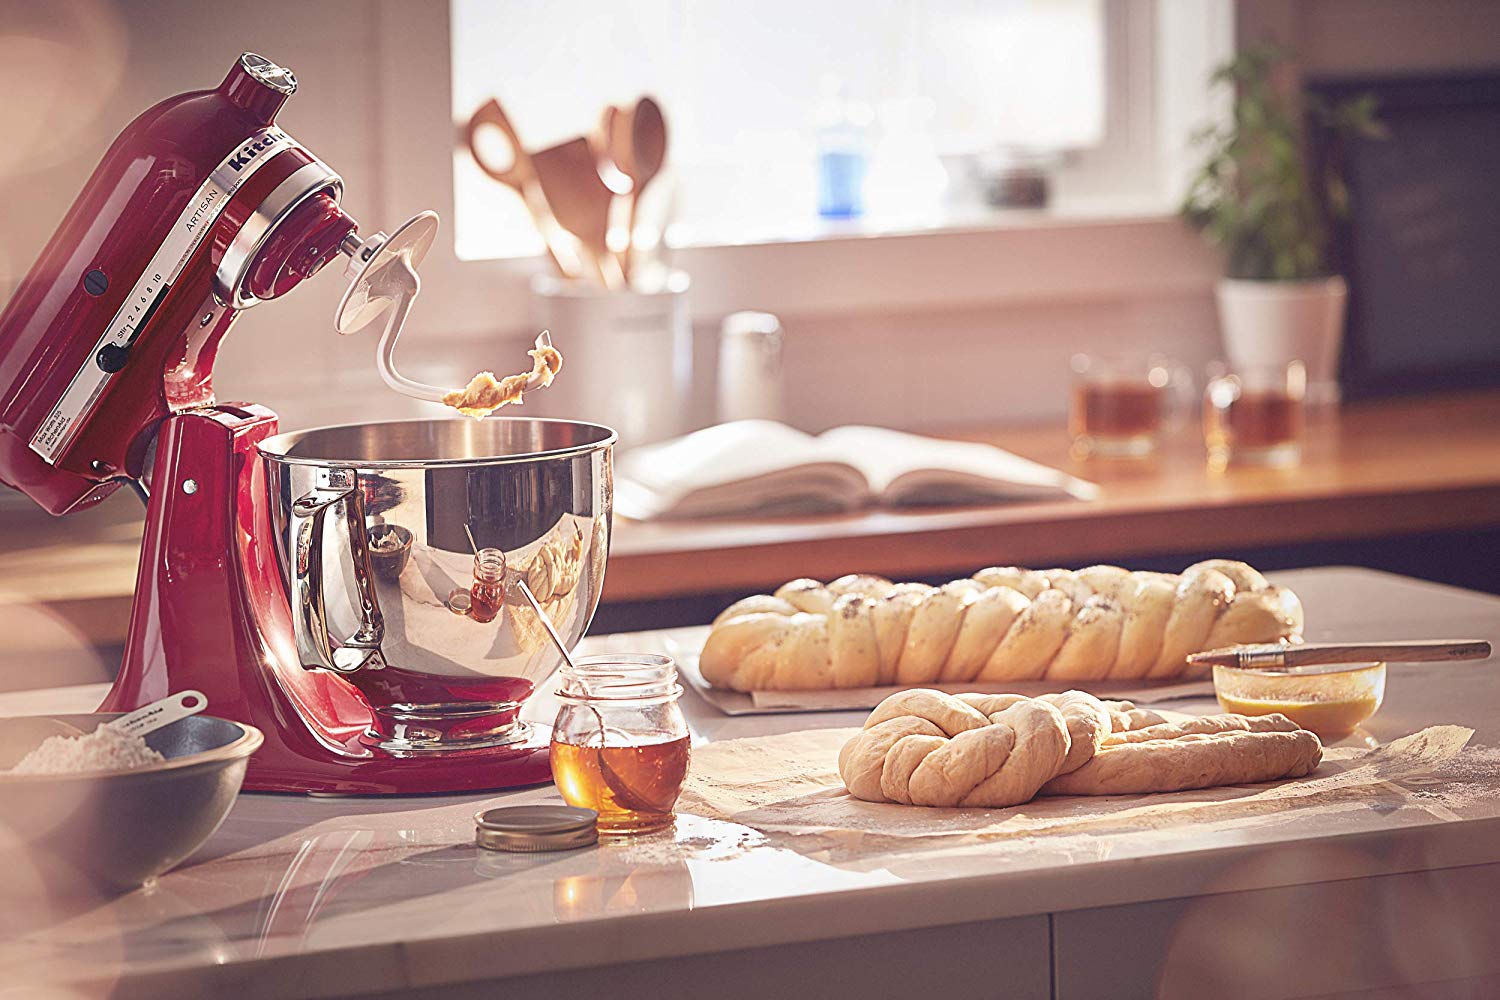 Here's the KitchenAid Mixer Fix Everyone Needs to Know